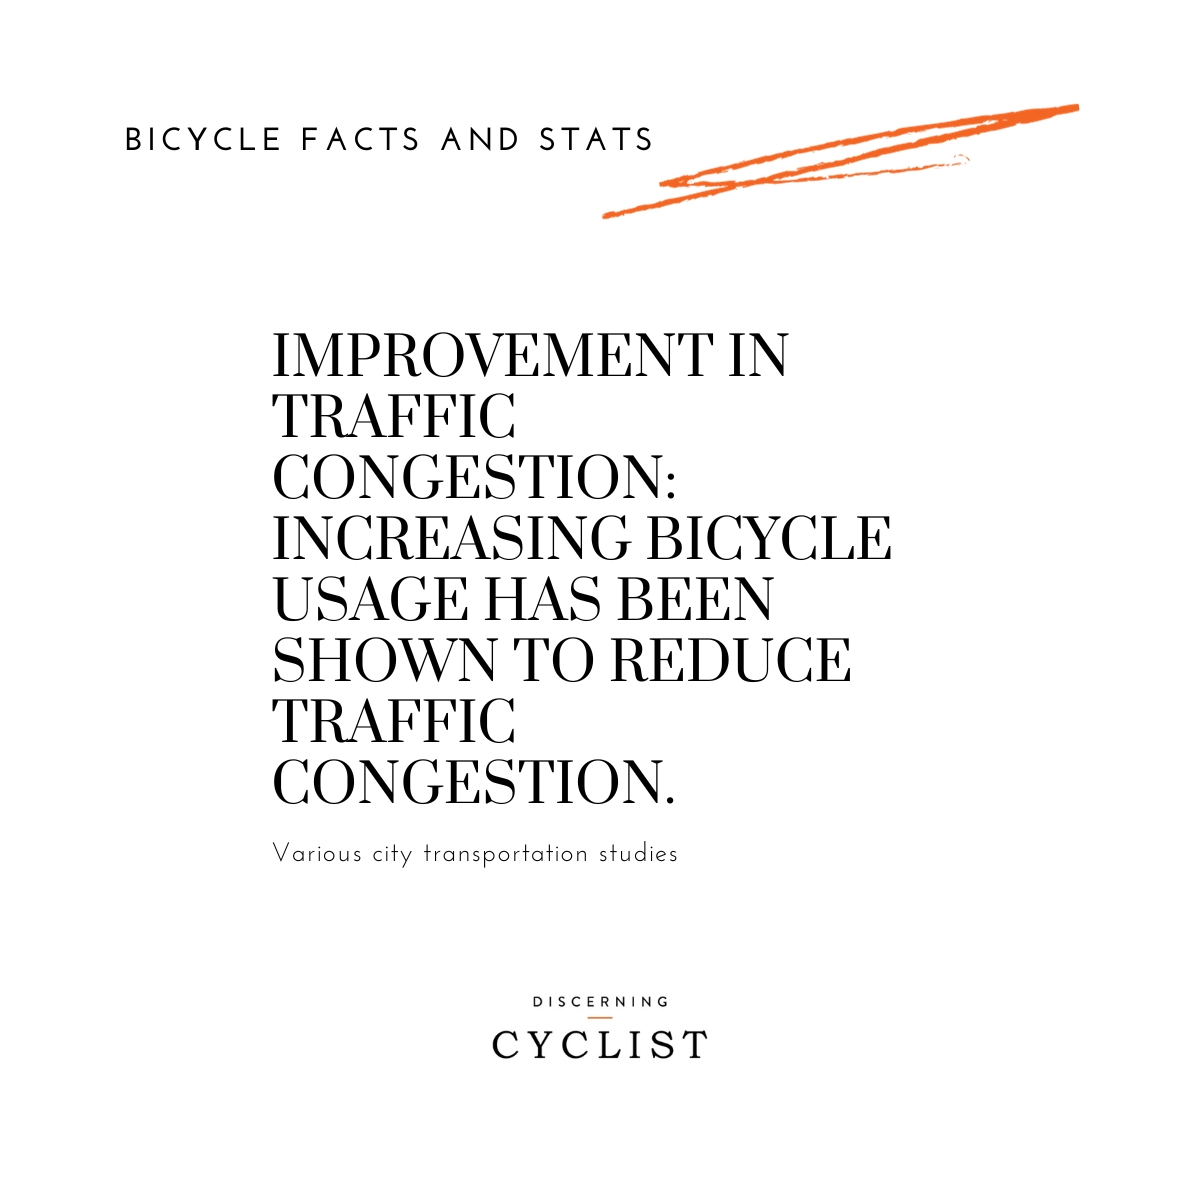 Improvement in Traffic Congestion: Increasing bicycle usage has been shown to reduce traffic congestion.